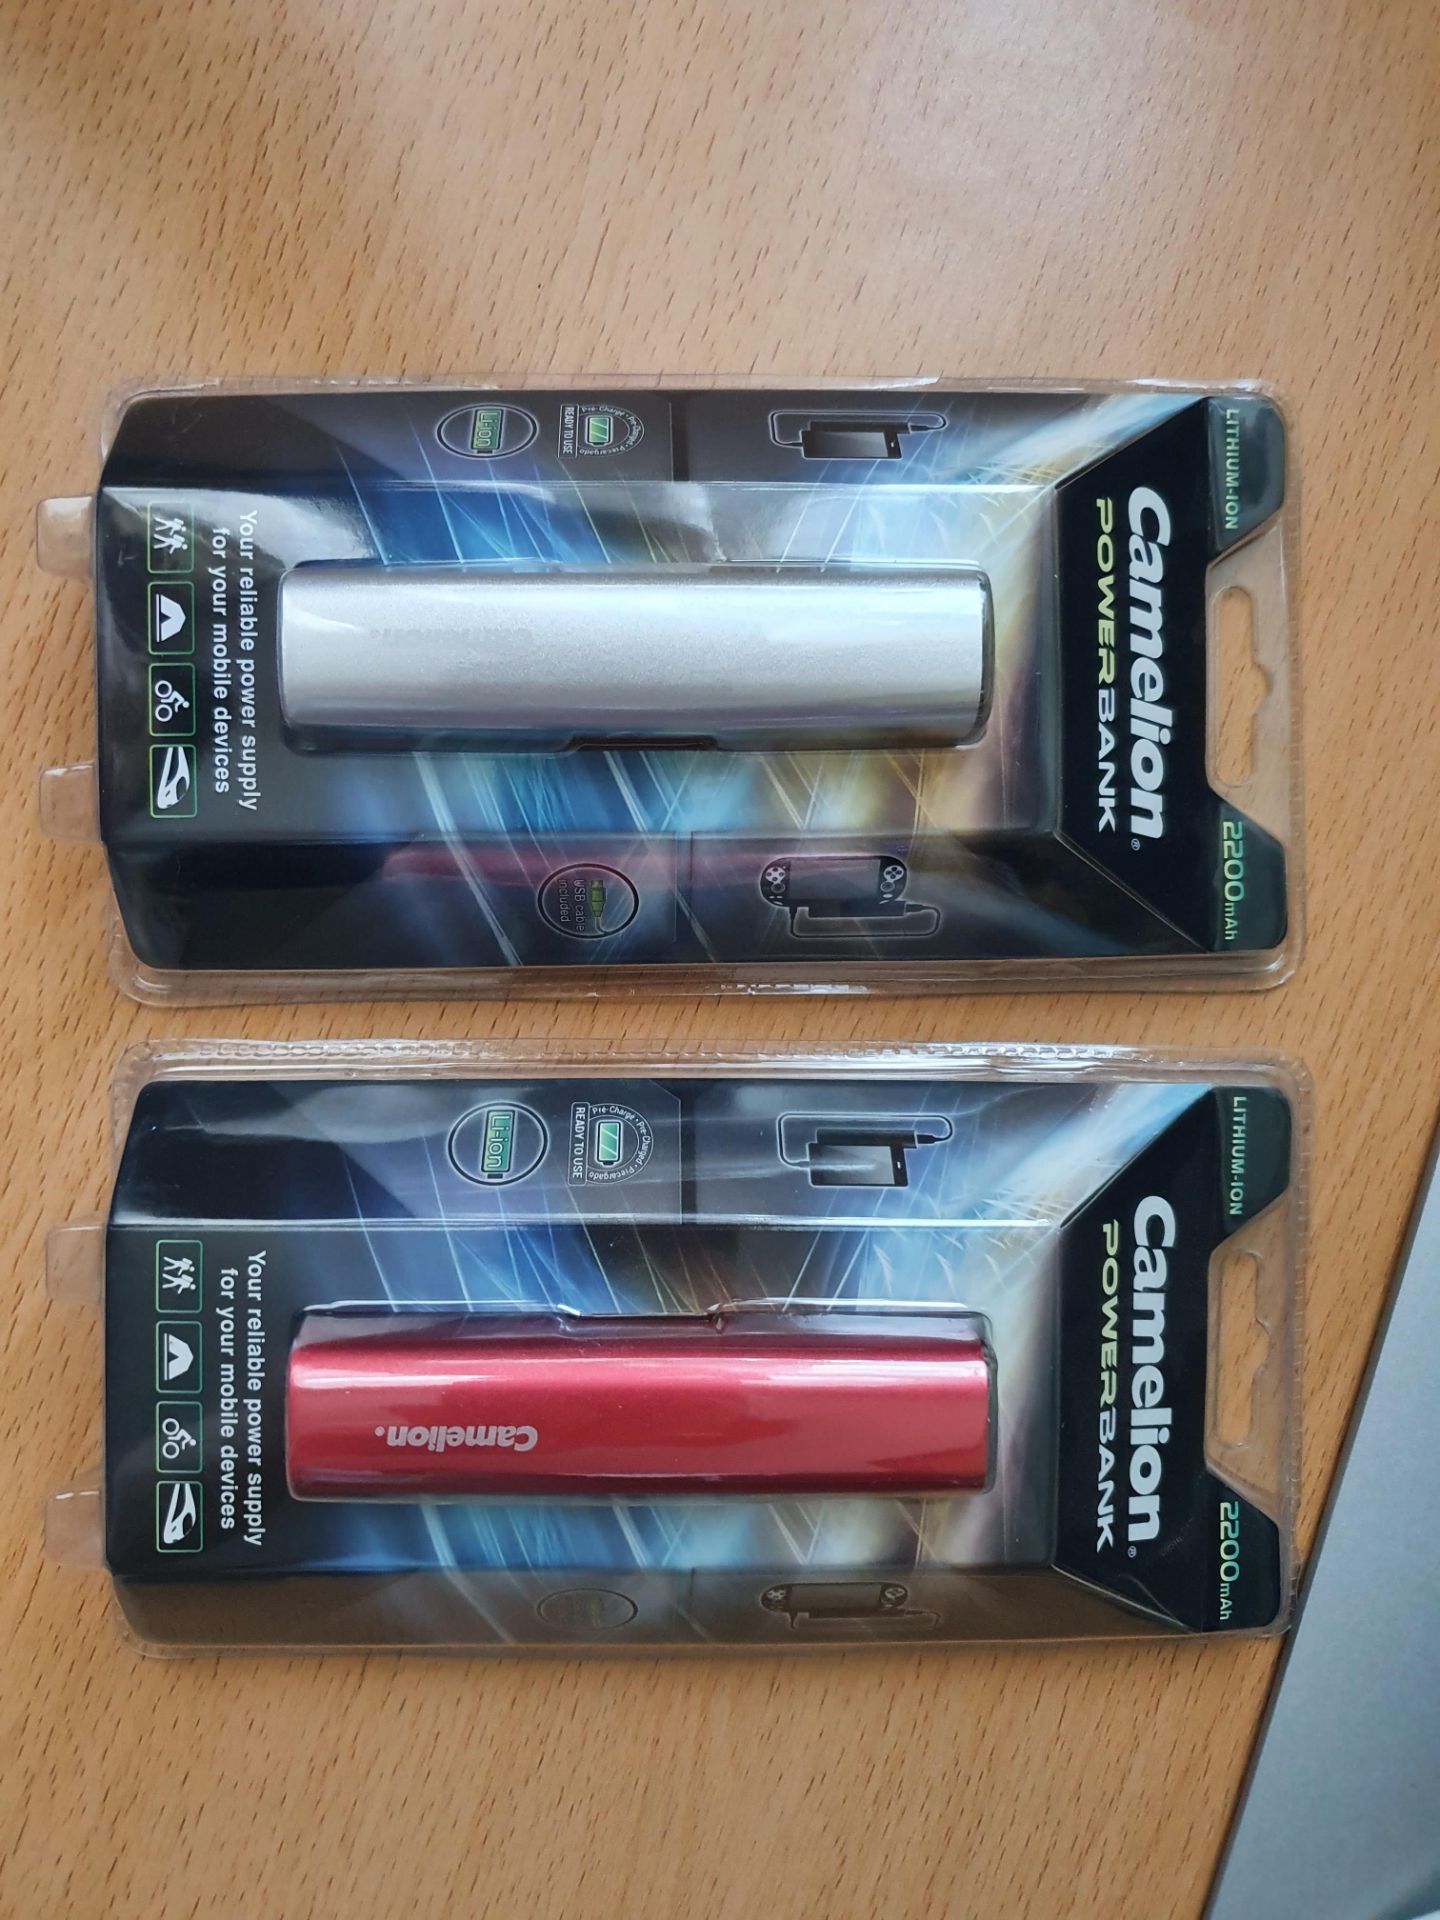 2 x high quality camelion pocket size power bank rrp £30